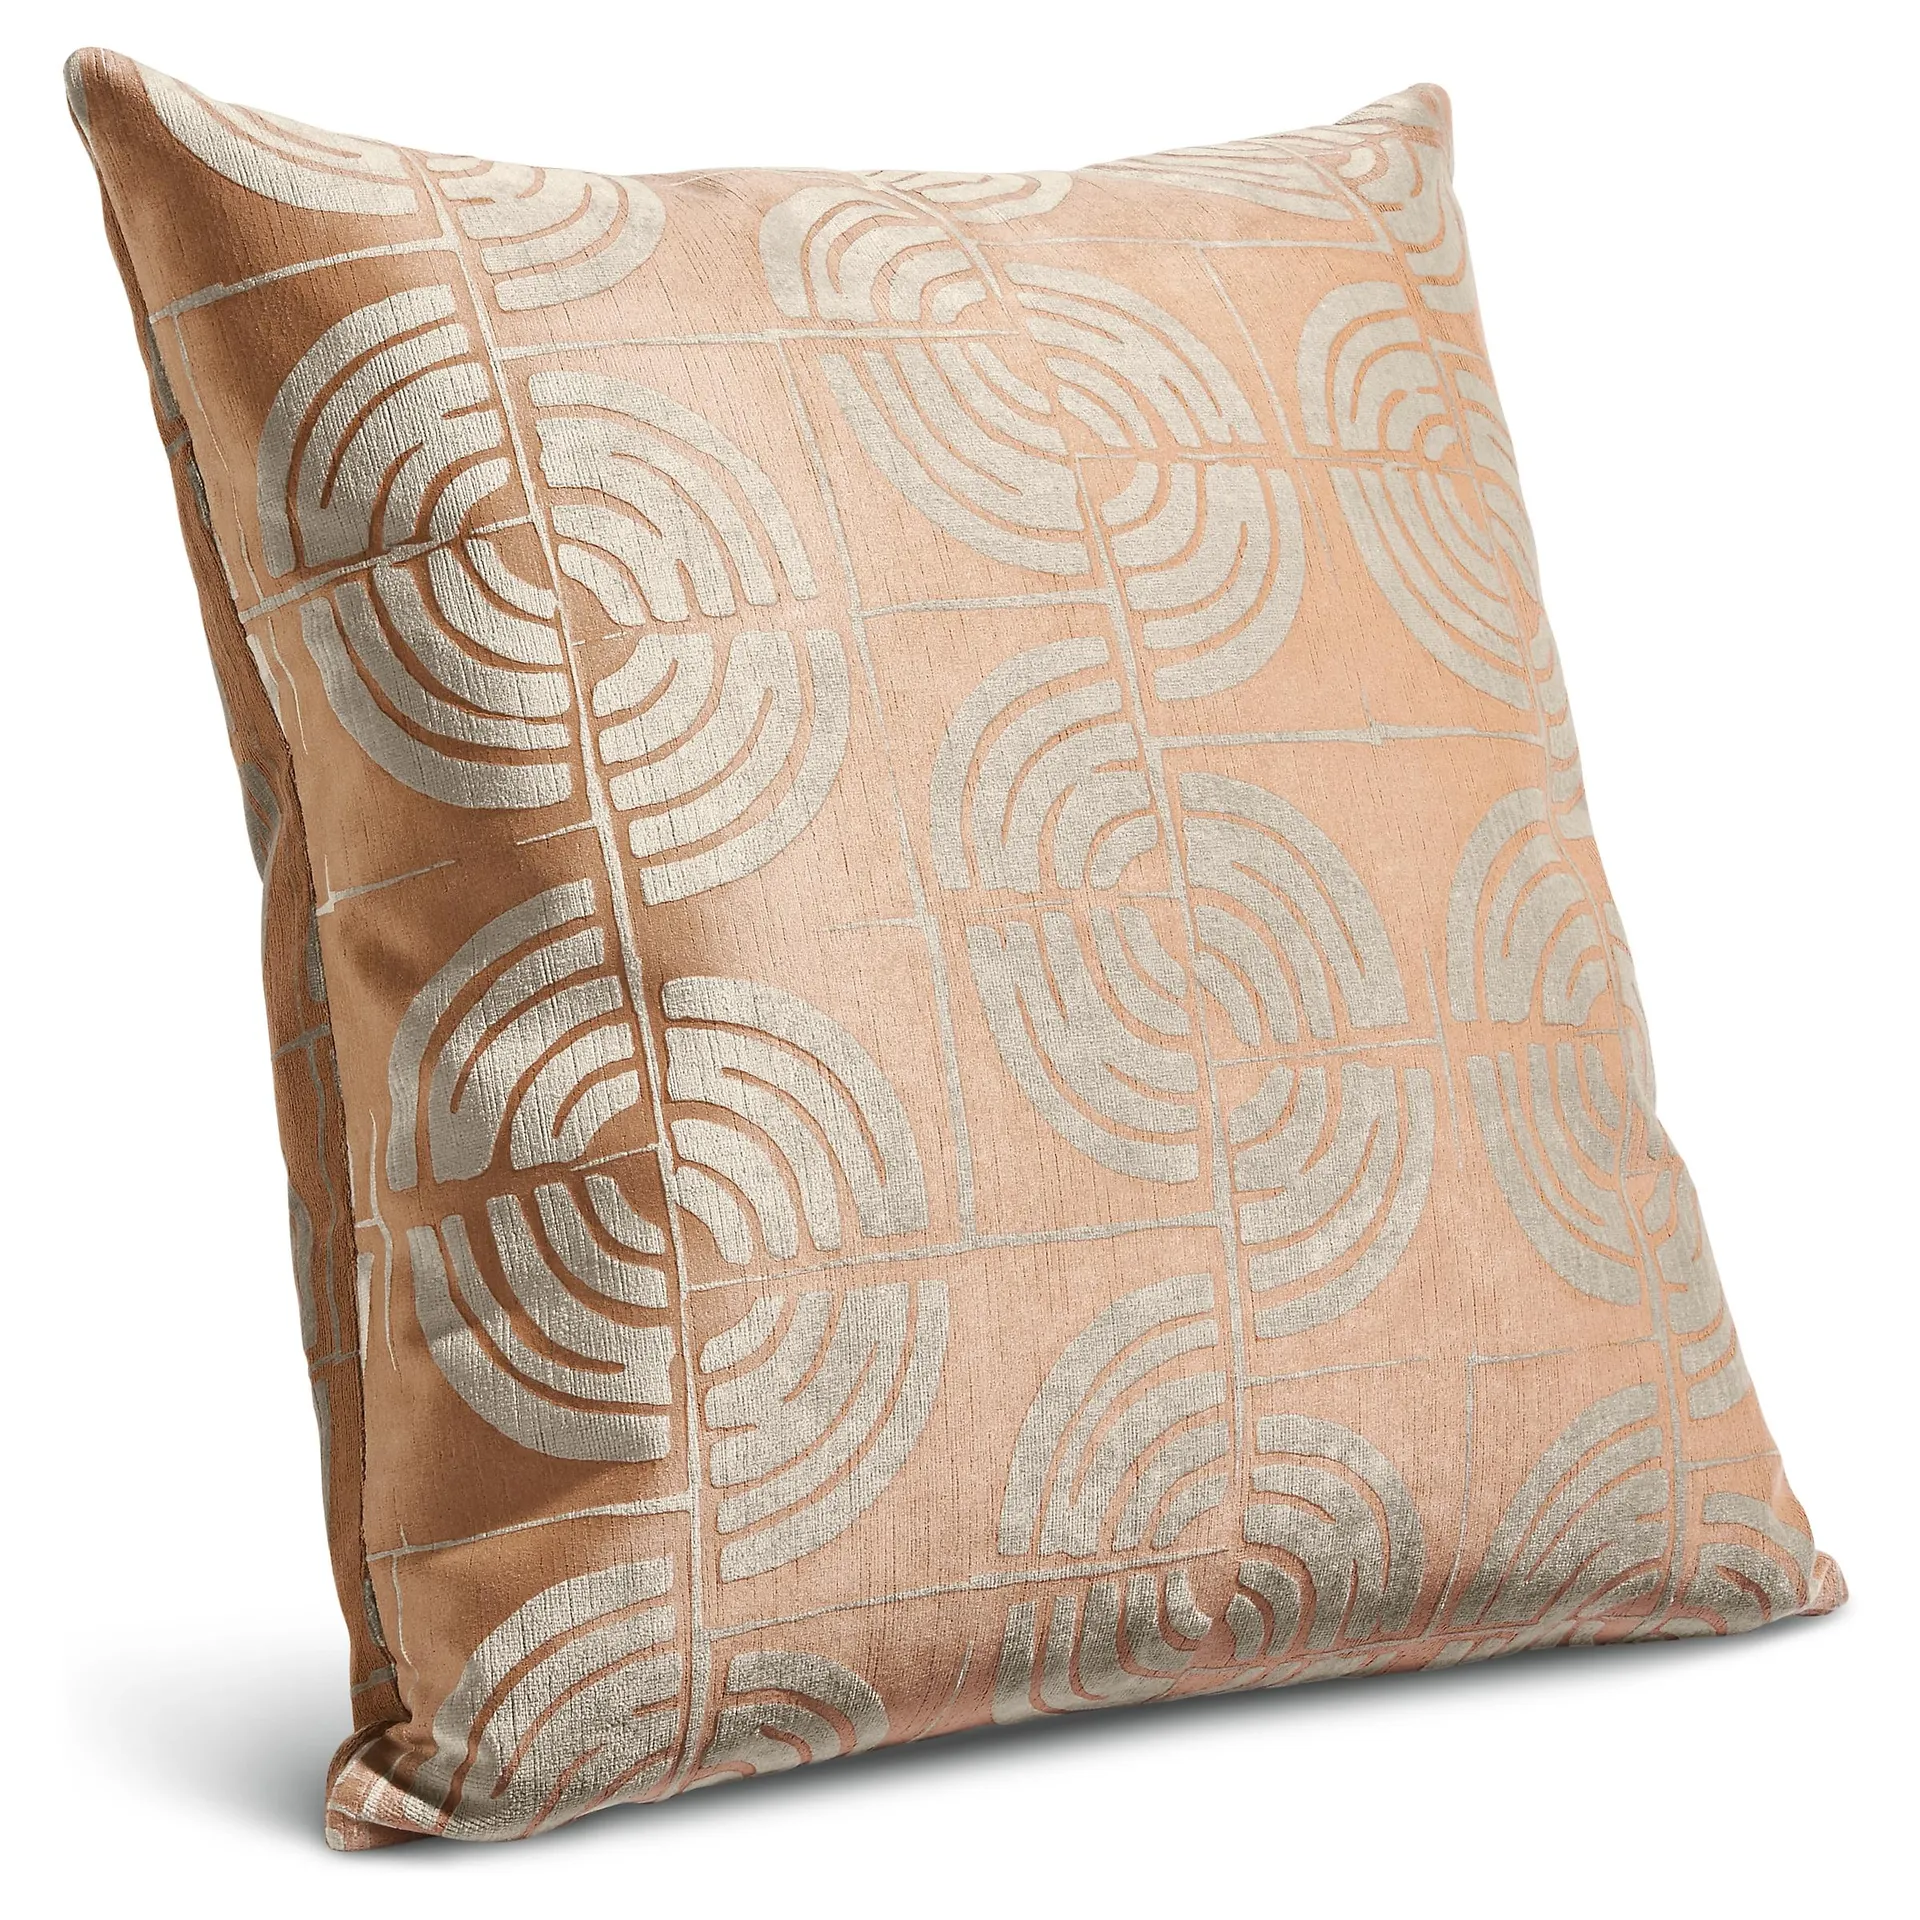 Arches 22w 22h Throw Pillow Cover in Camel